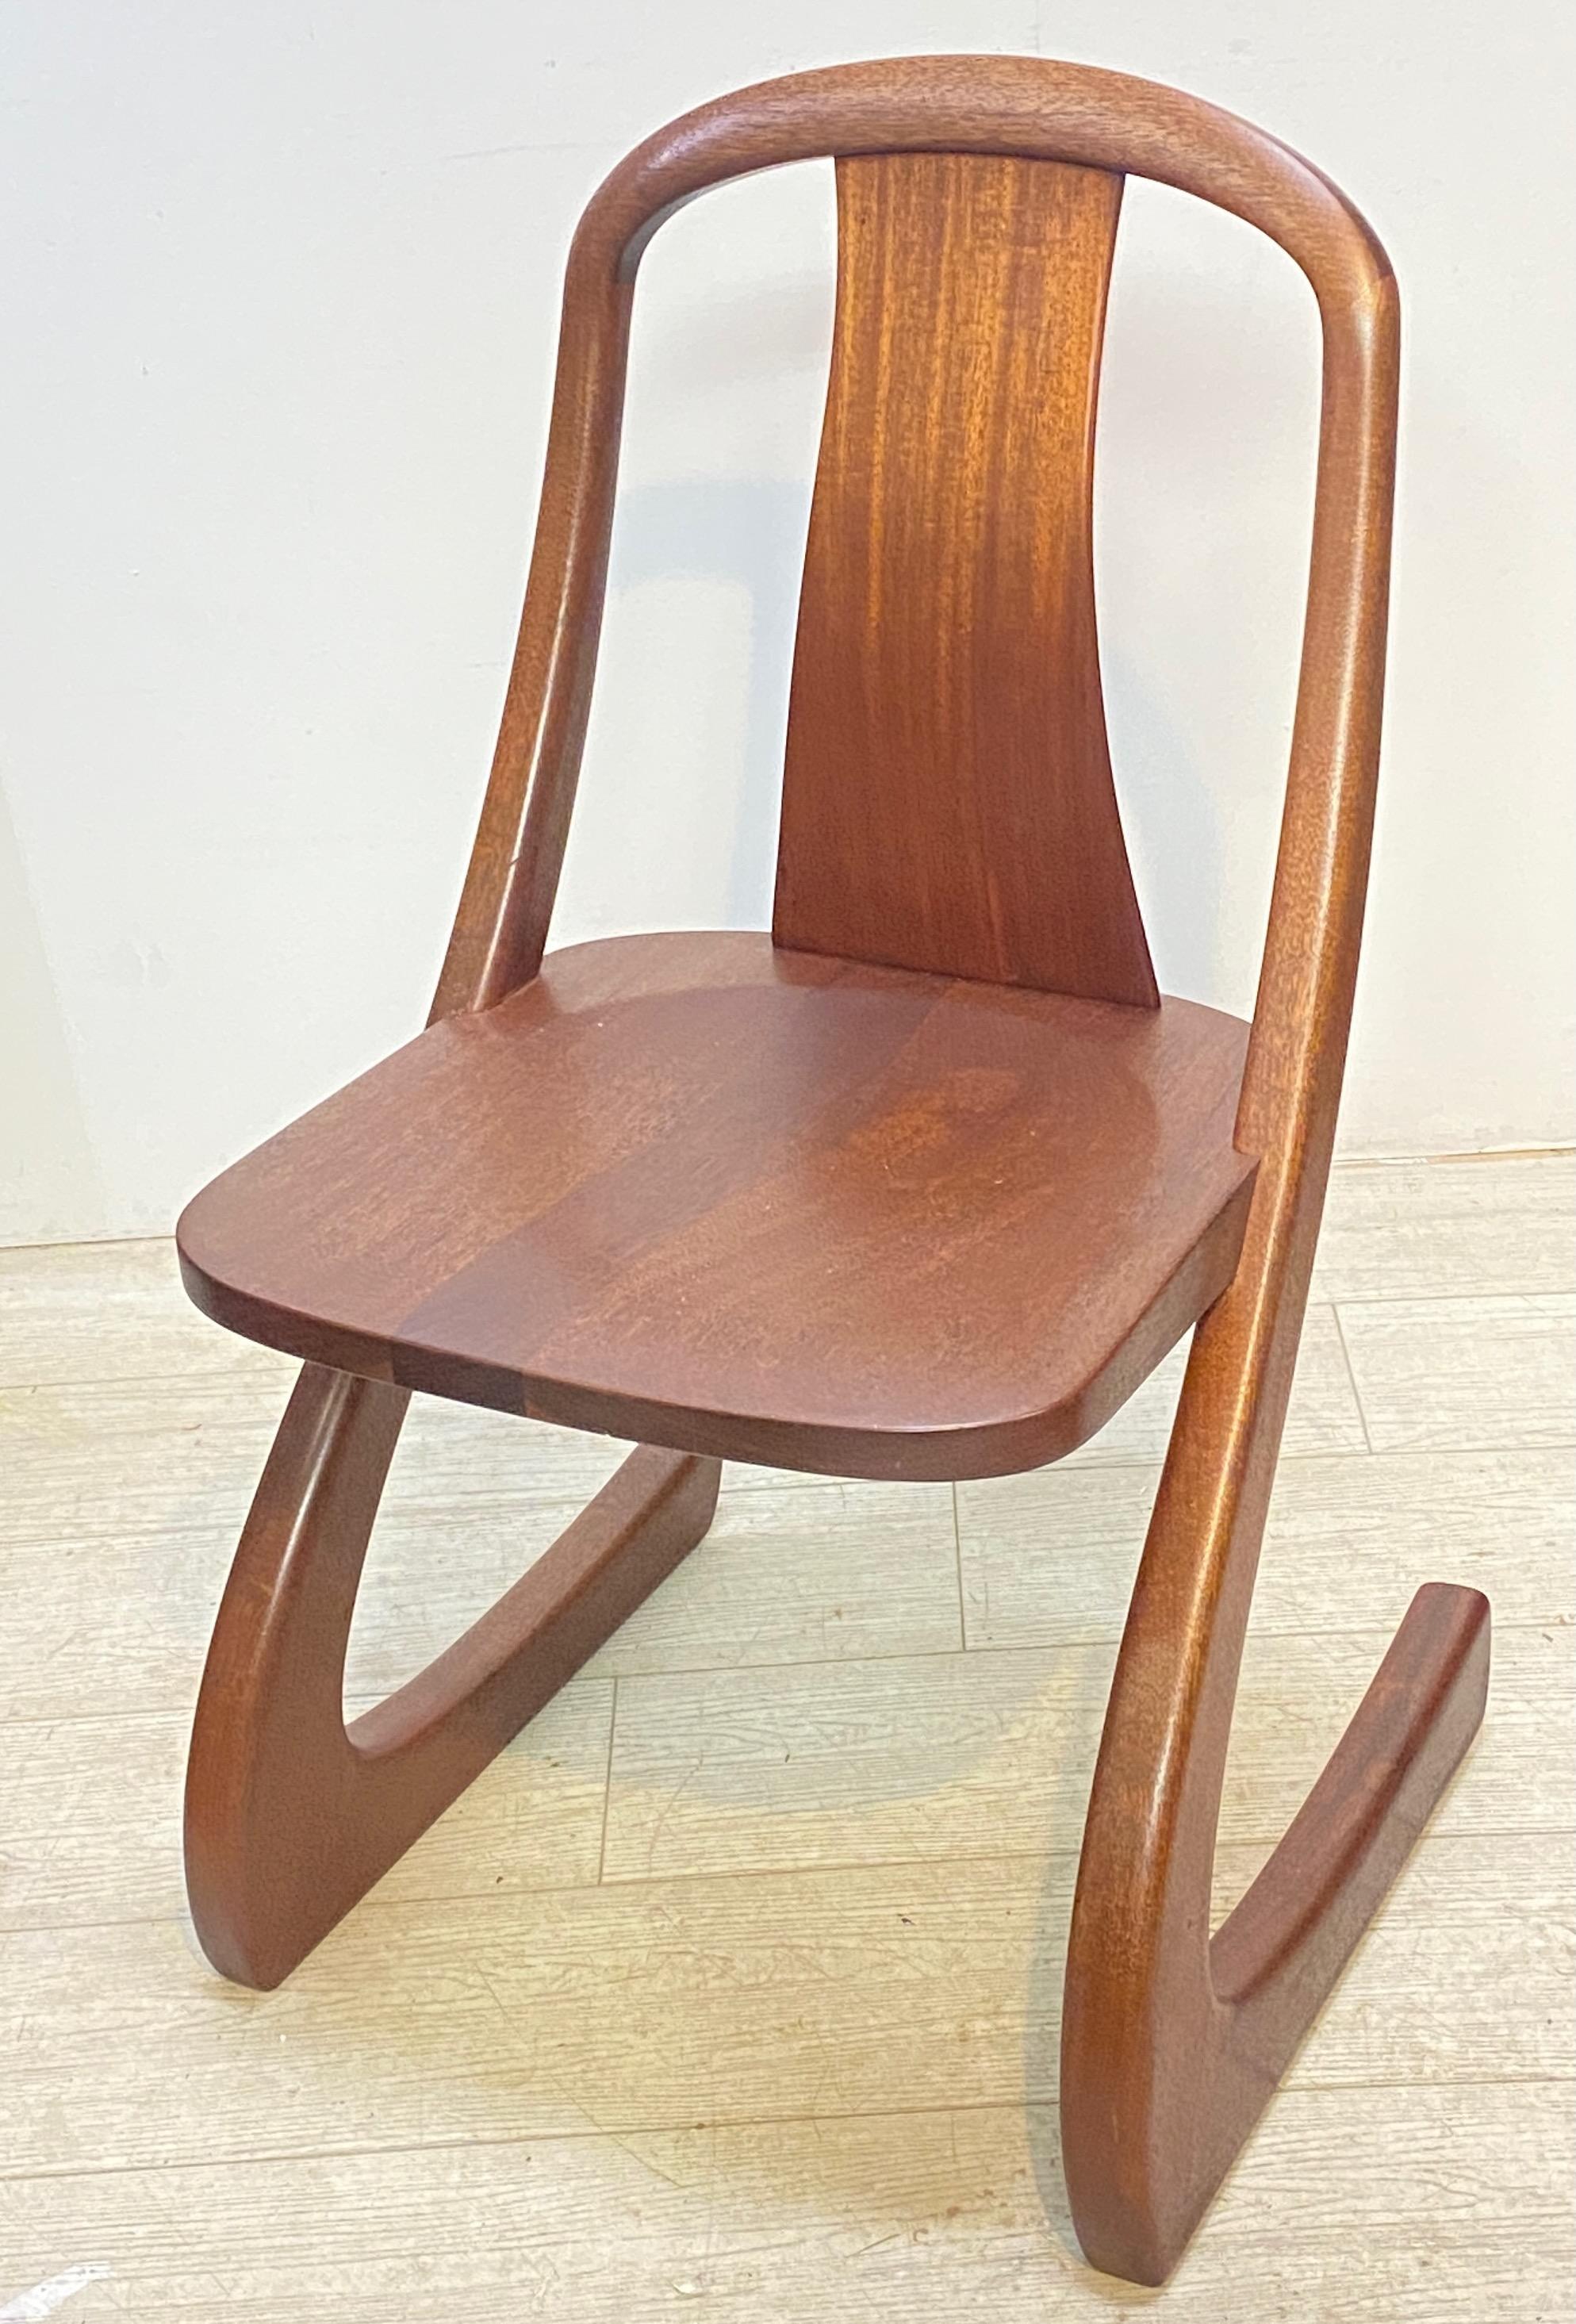 Solid mahogany Mid-Century Modern chair. Carved initials GS on the underside of the seat (maker unknown).
Sturdy and comfortable.
American, 1970's.